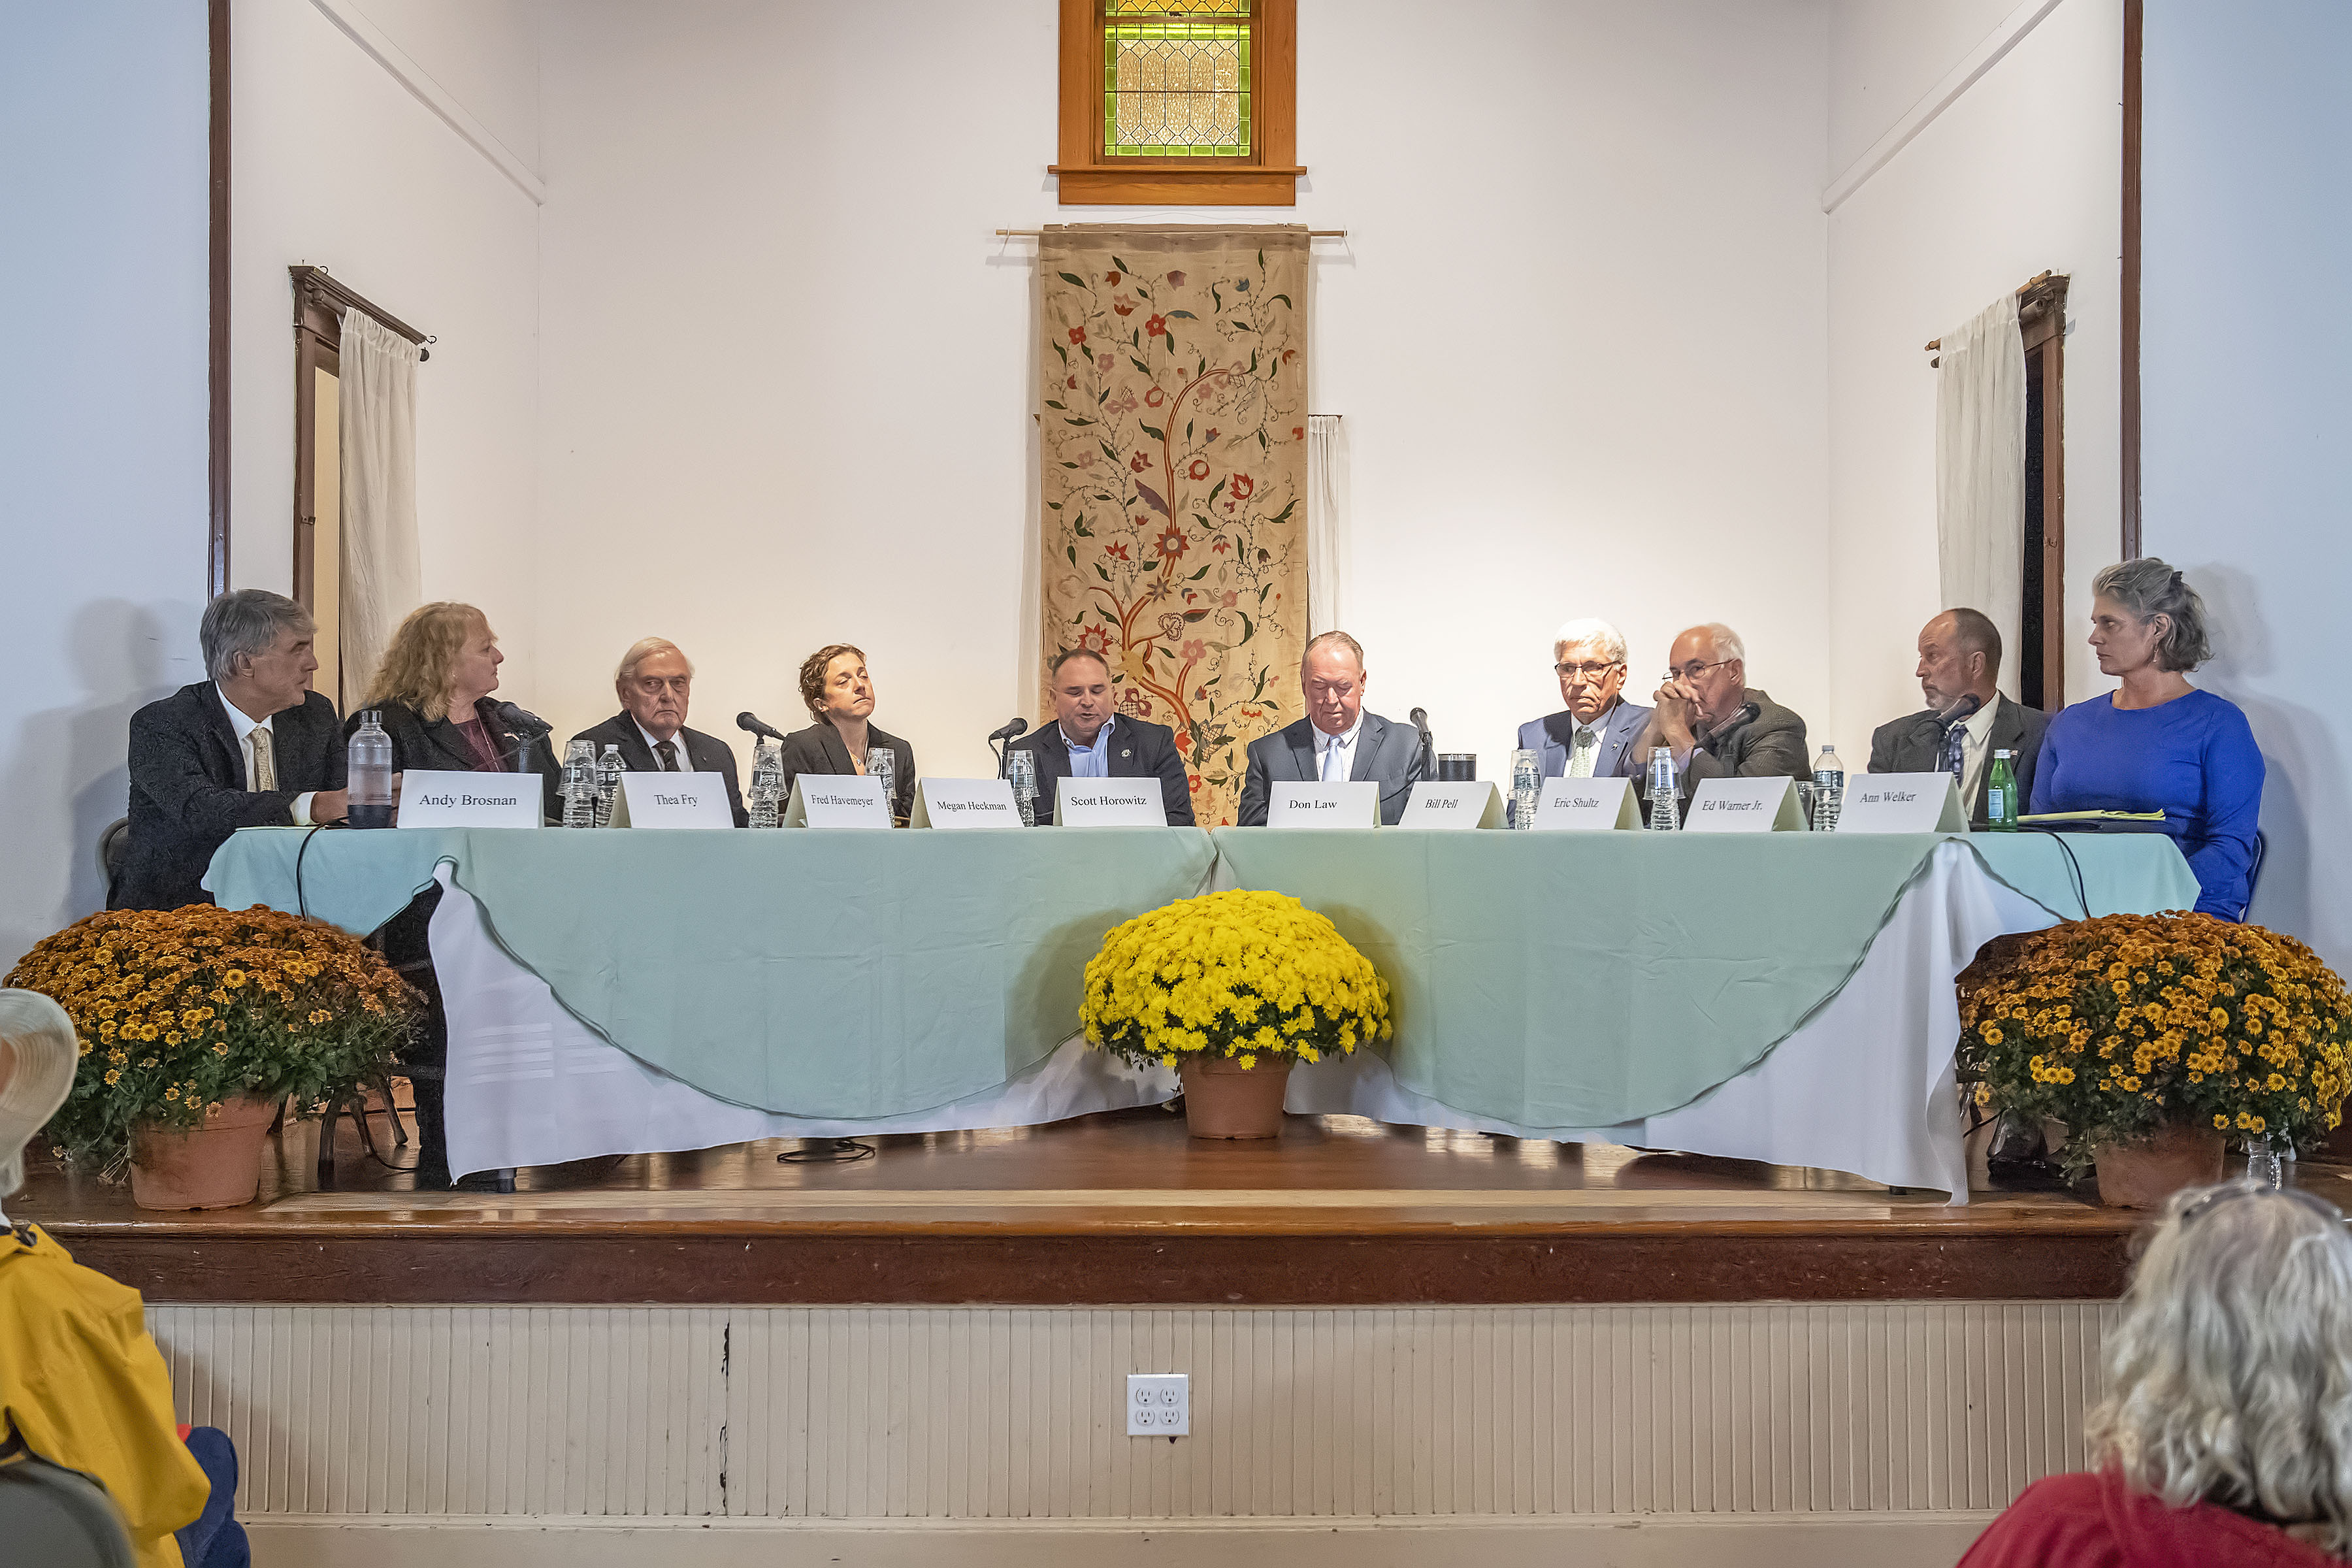 The panel of Southampton Town Trustee Candidates during a Meet the Candidates night at the Water Mill Community House on Wednesday, October 16.  MICHAEL HELLER